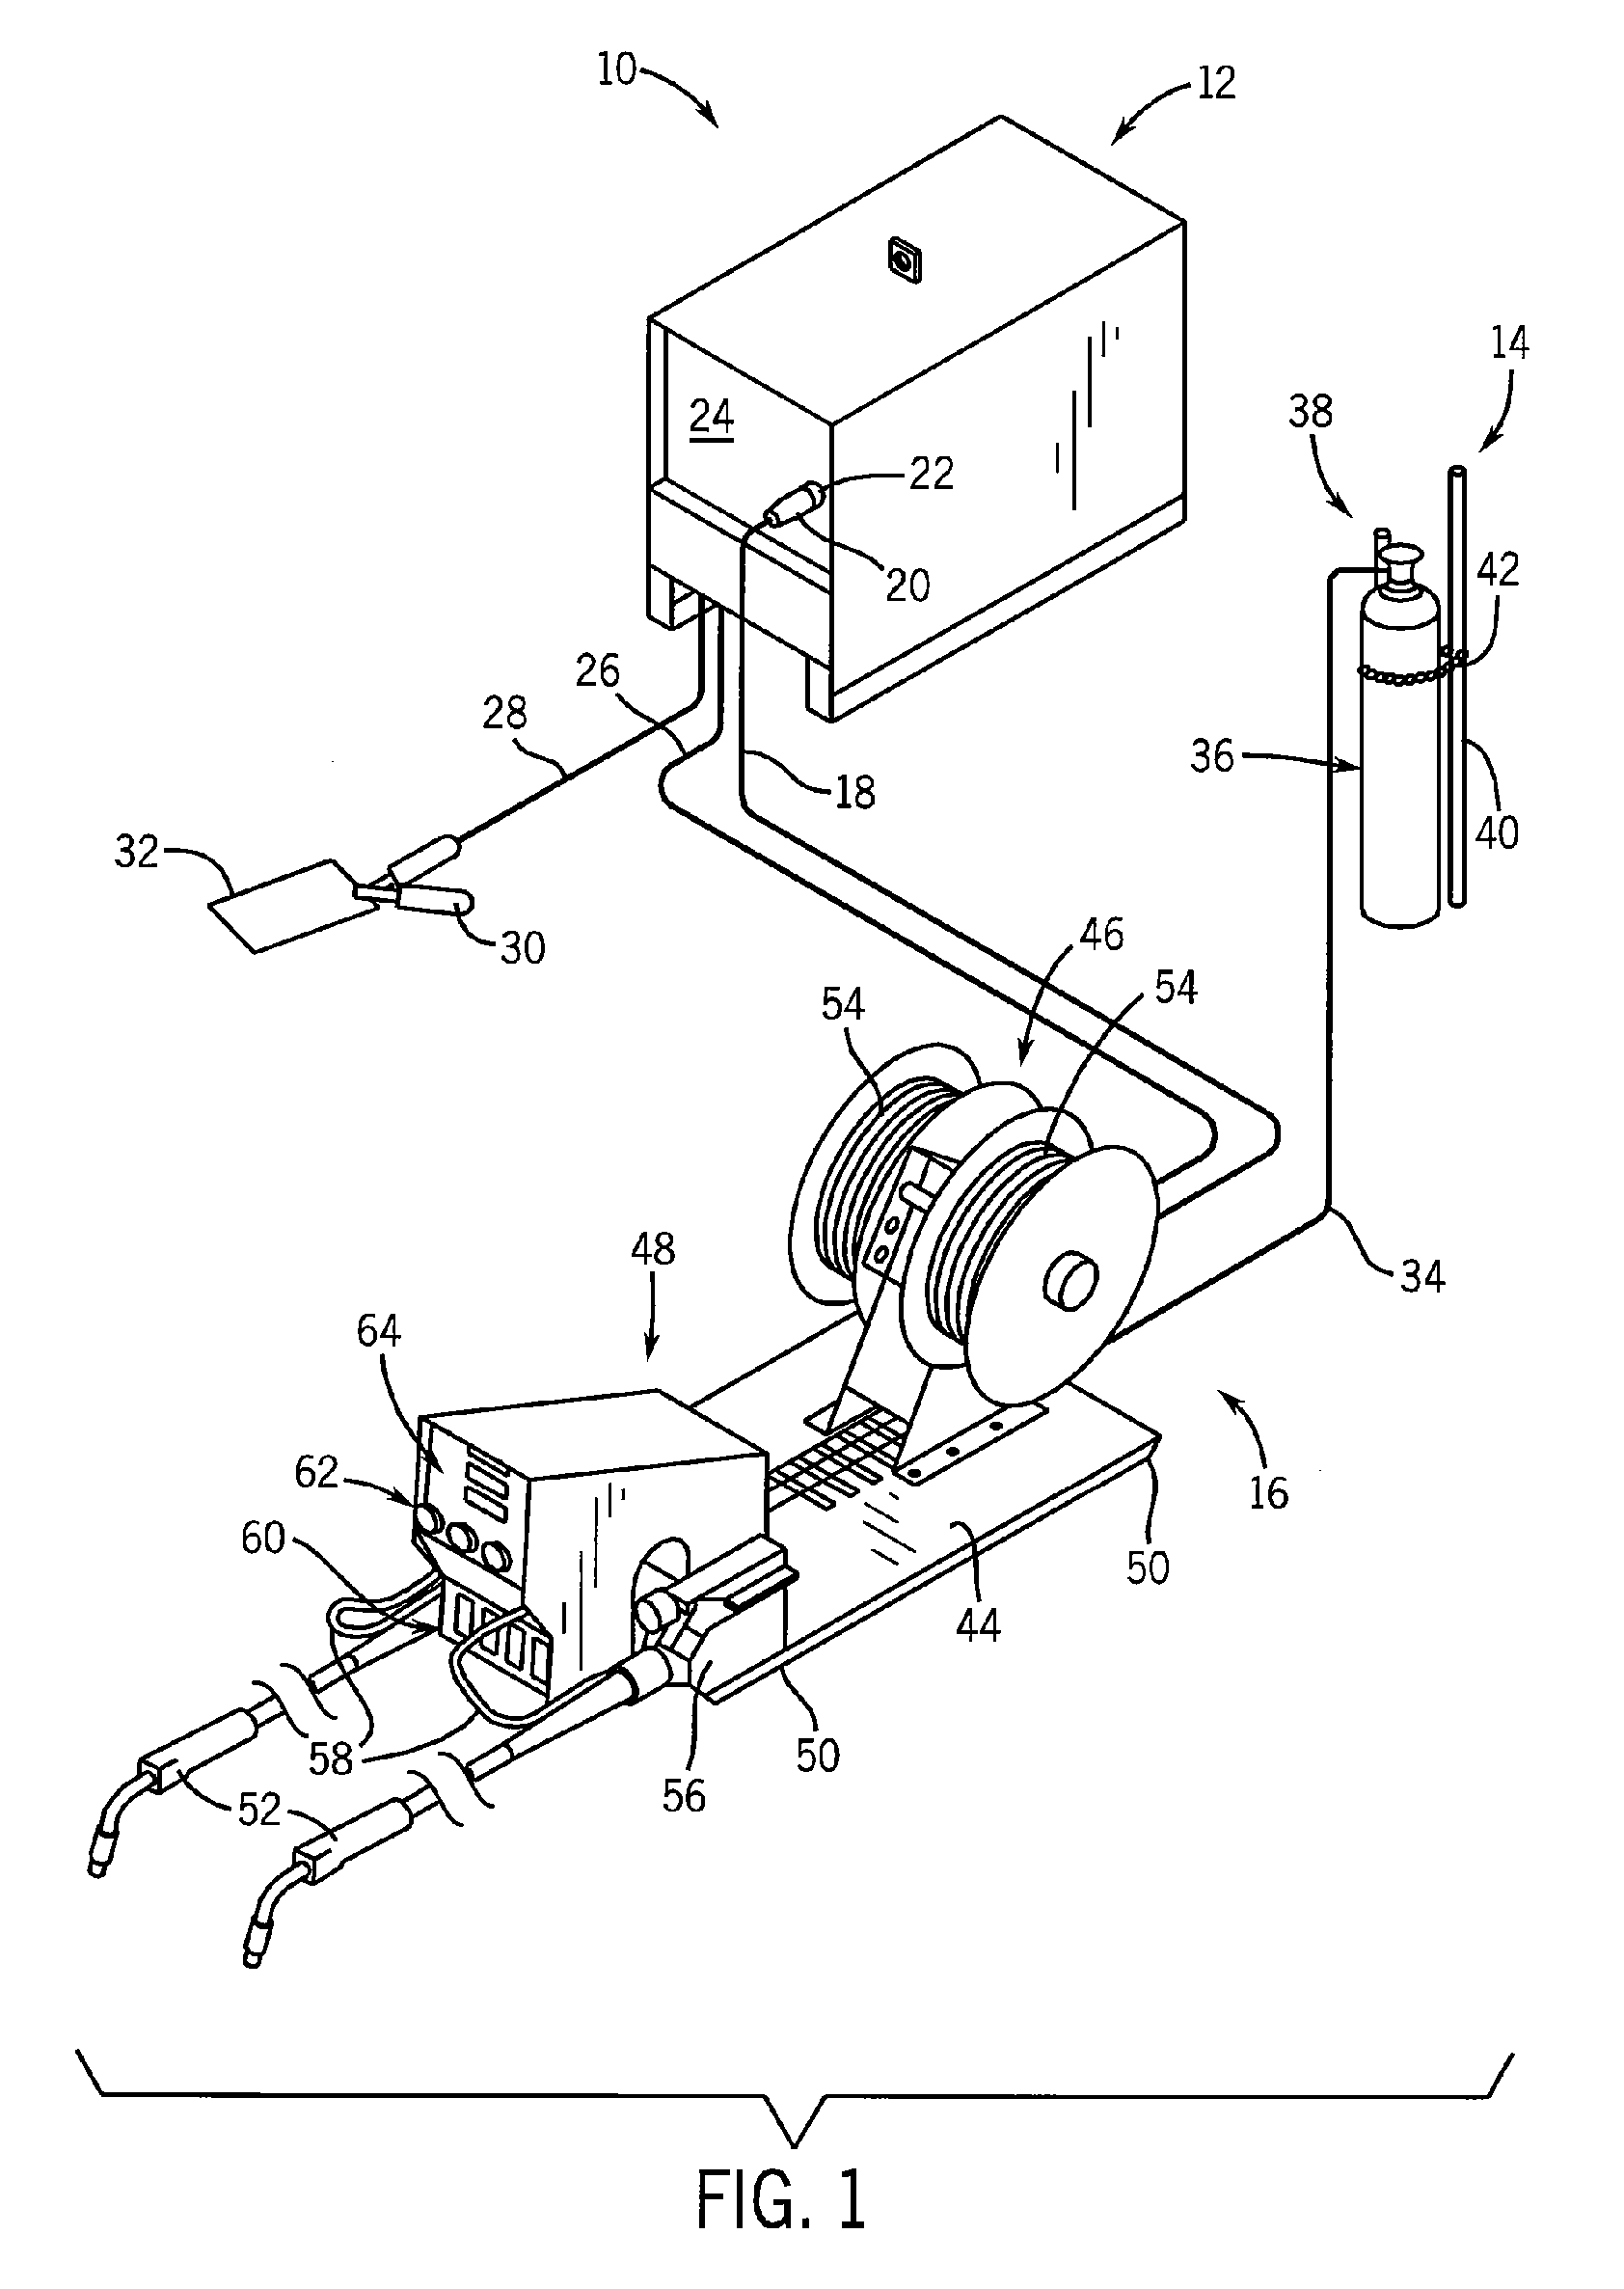 System and method of precise wire feed control in a welder